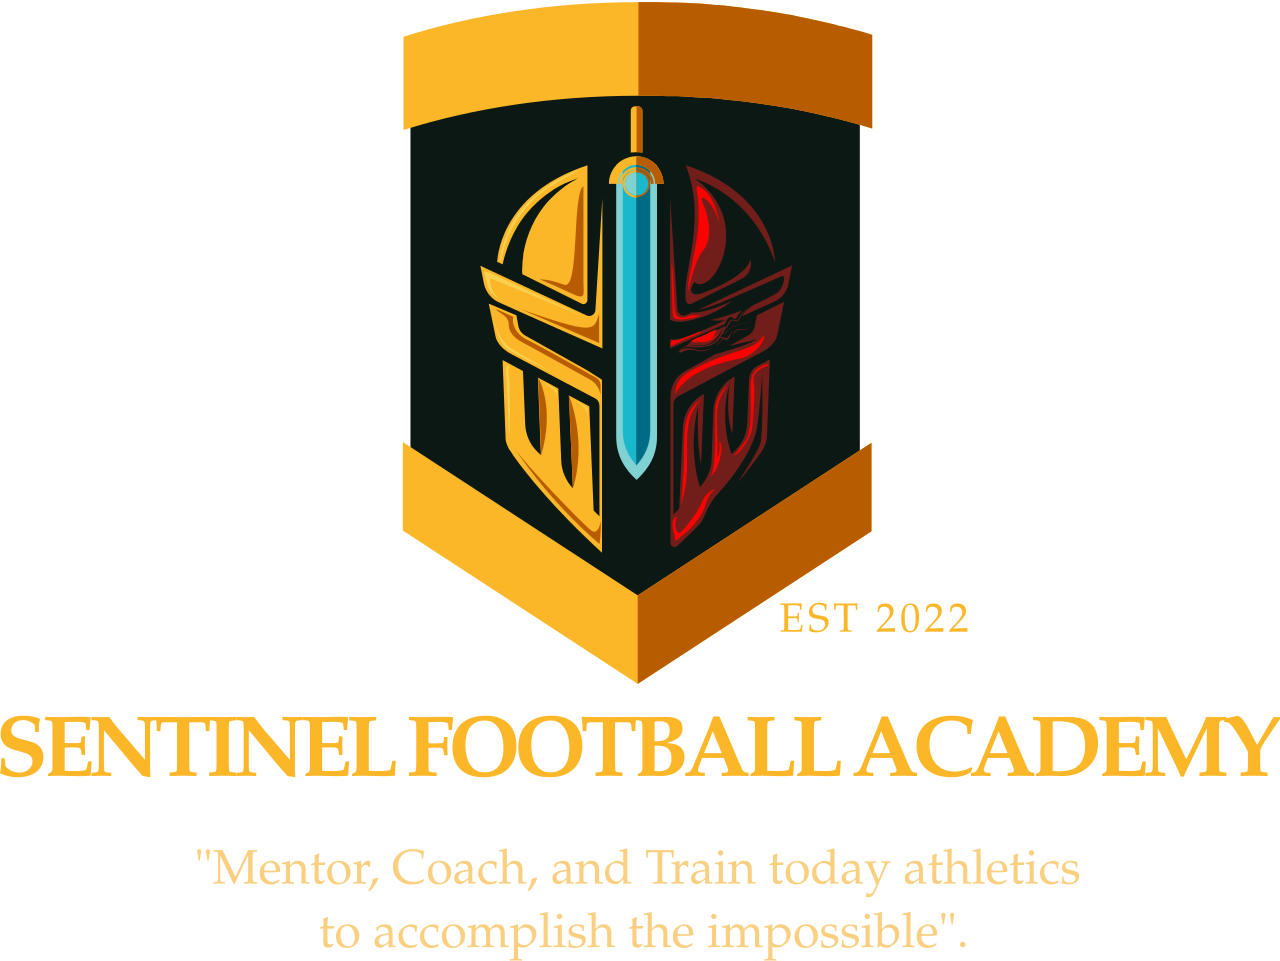 Sentinel Football Academy's web page